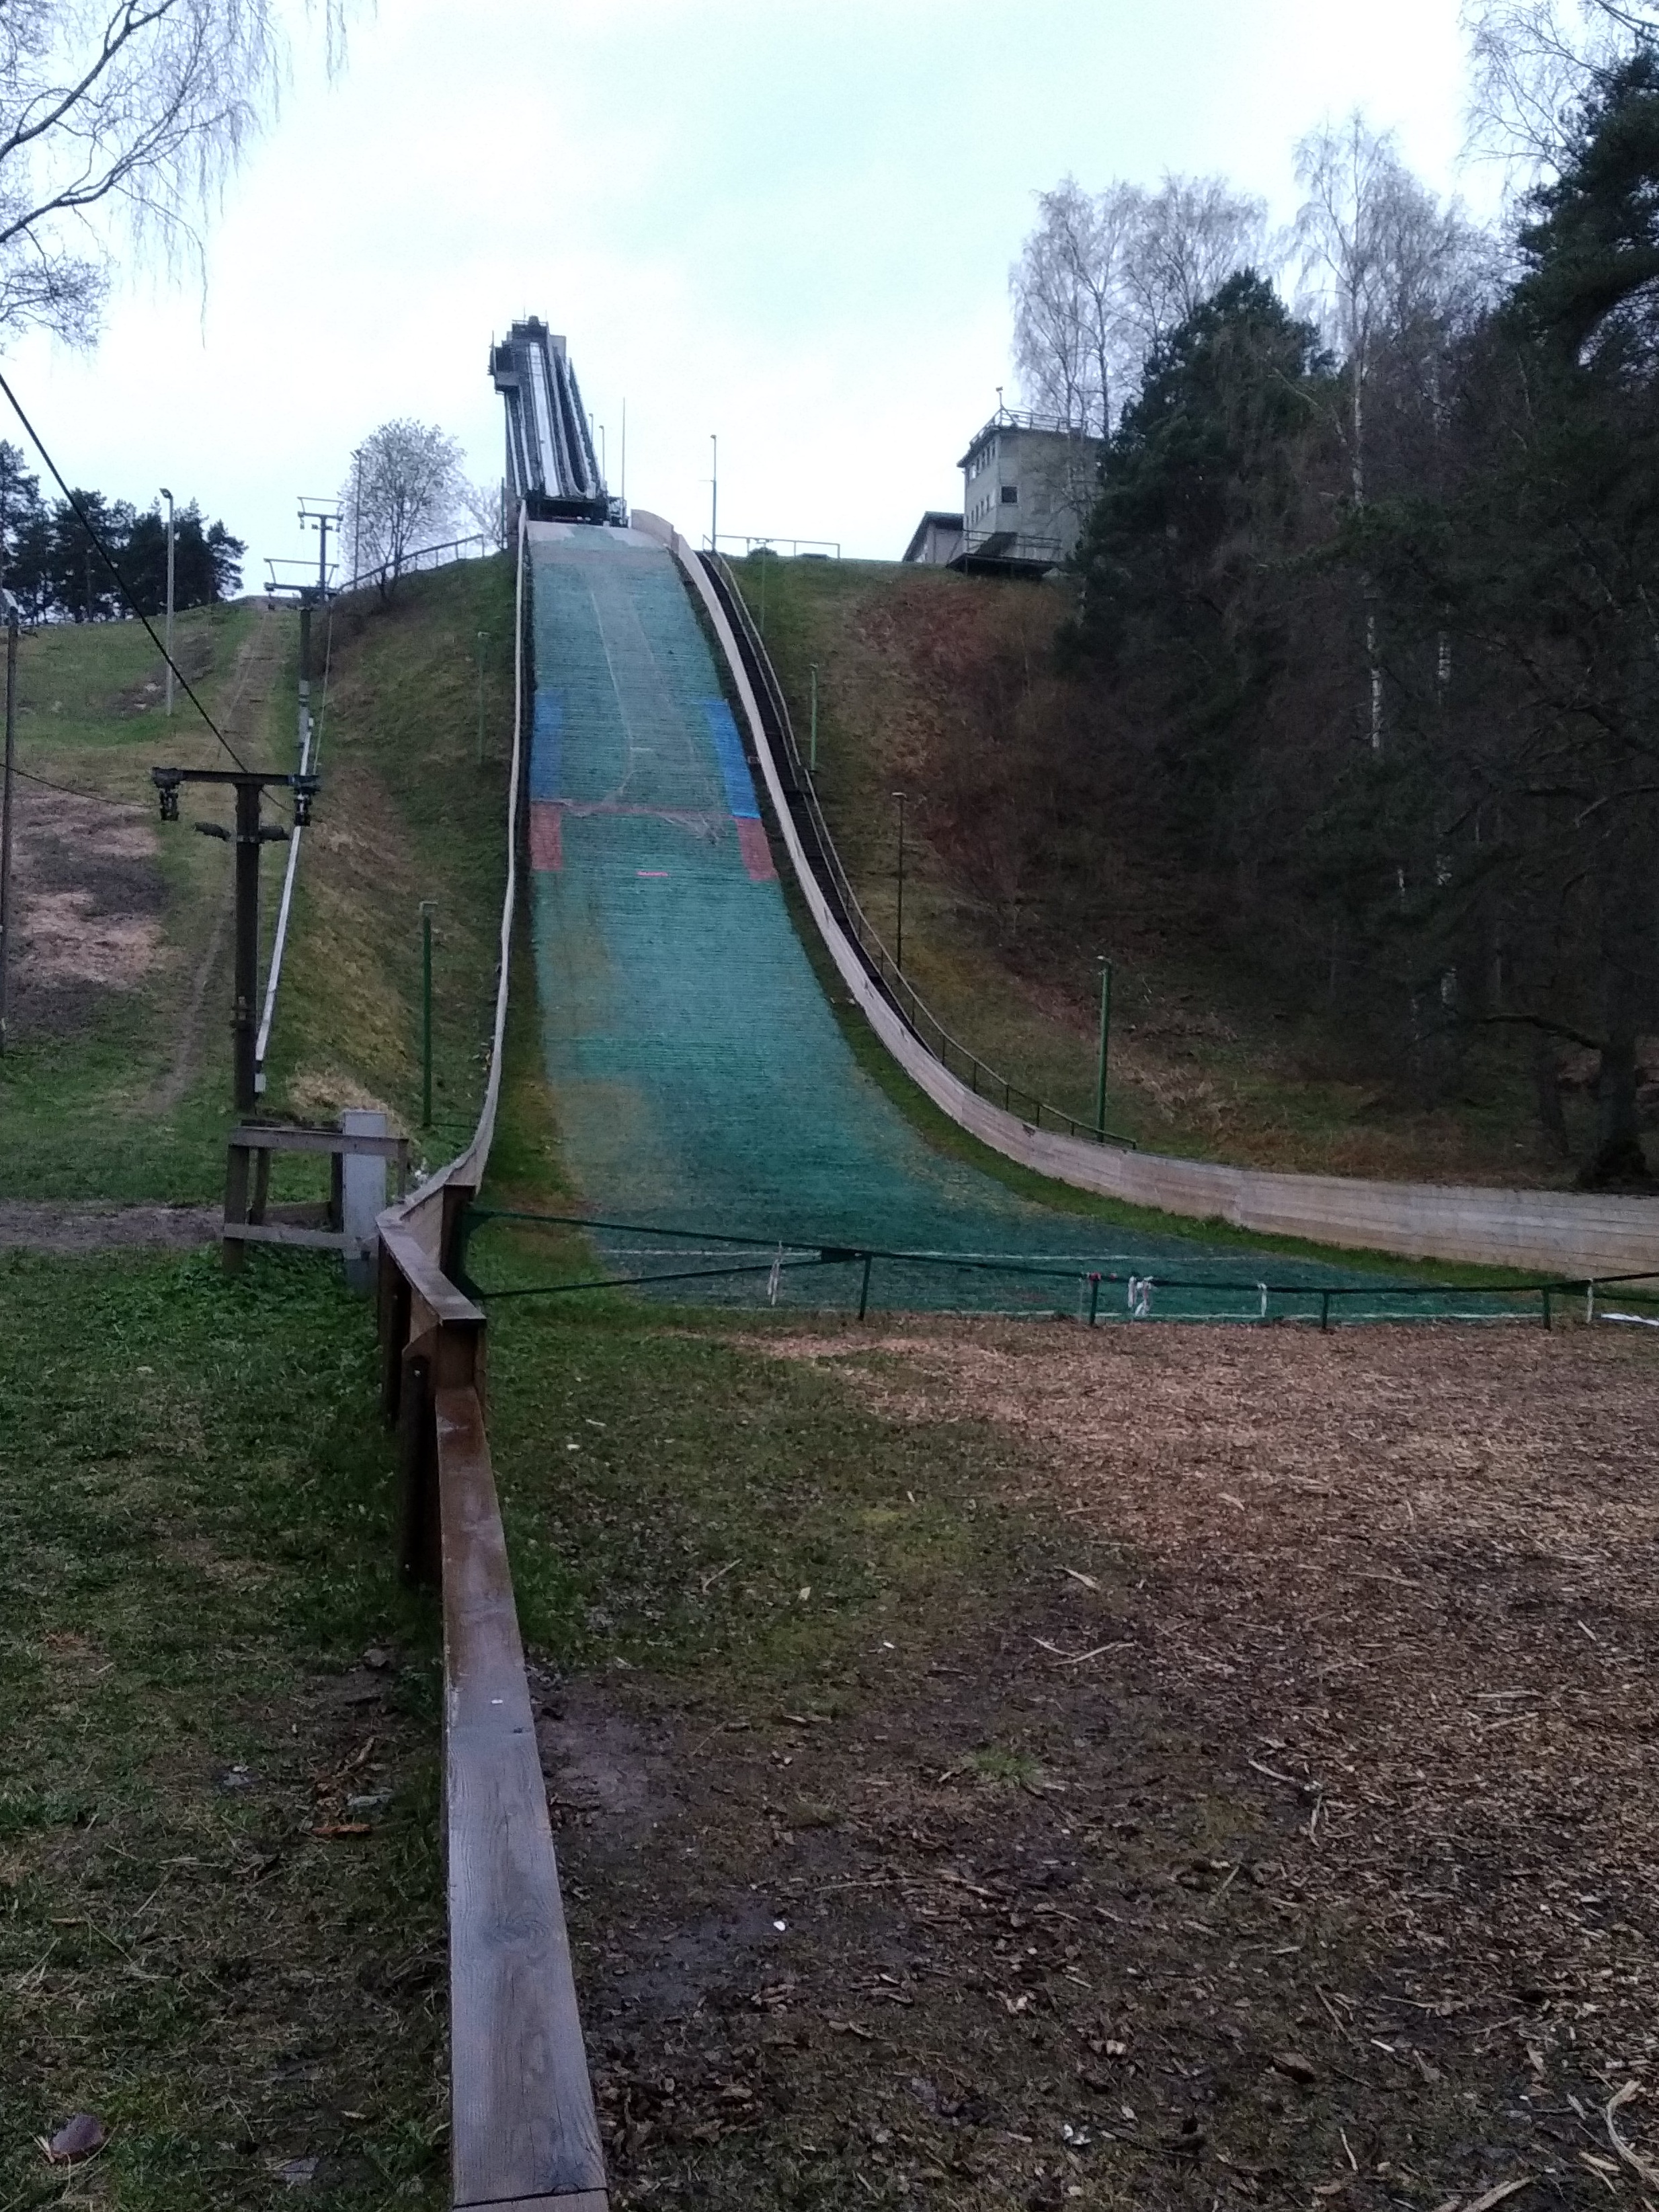 View of the ski jump tower on Mustamäe. rephoto